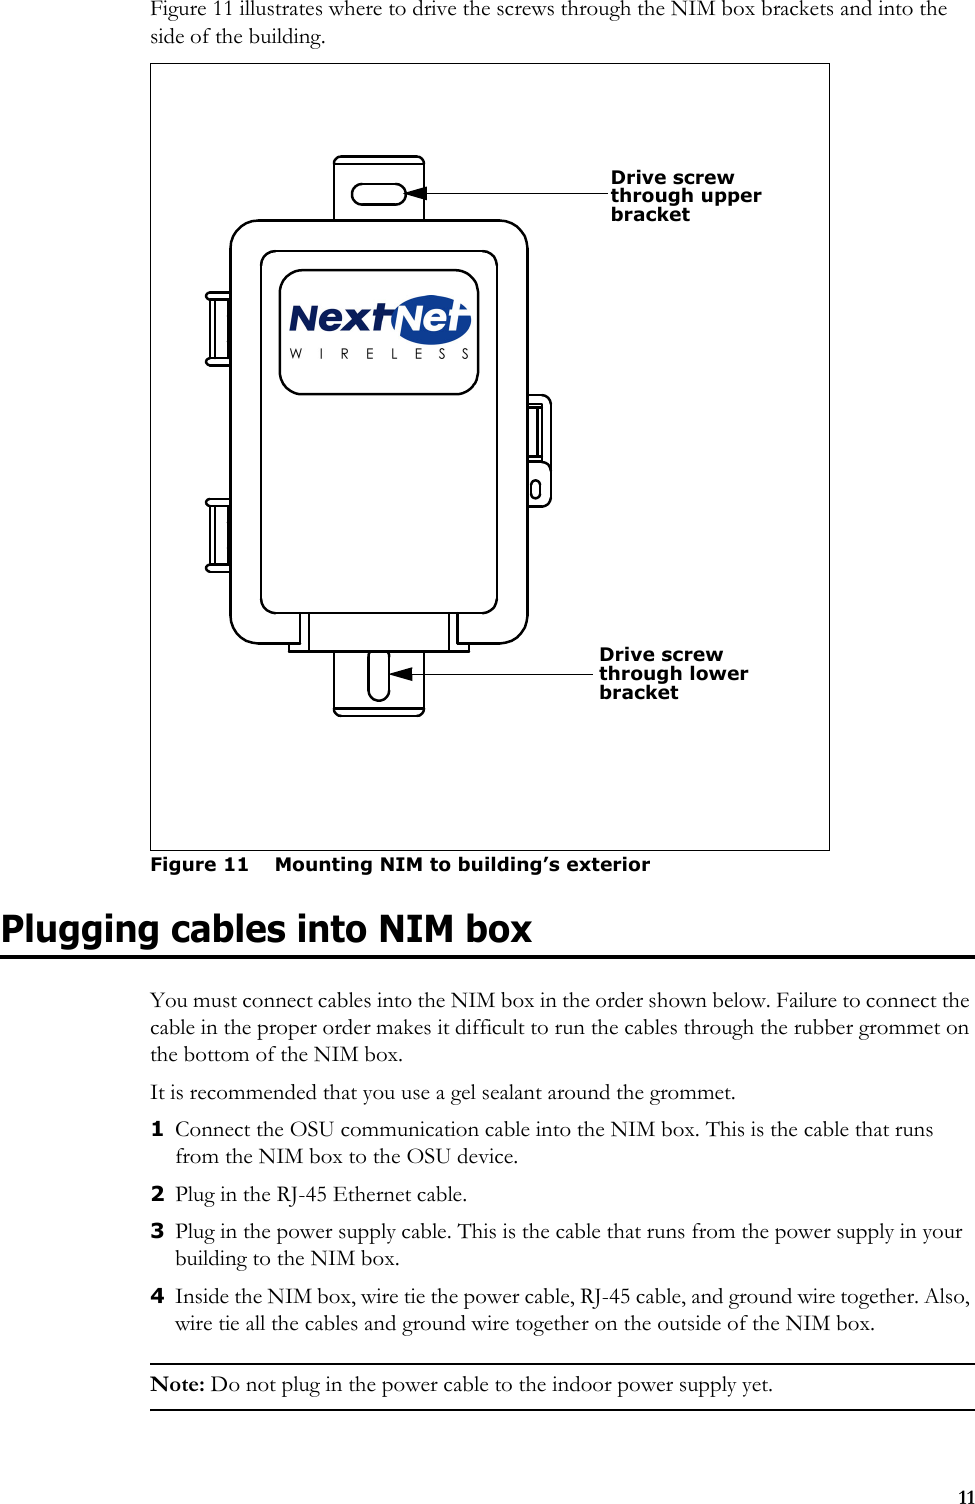 11Figure 11 illustrates where to drive the screws through the NIM box brackets and into the side of the building. Plugging cables into NIM boxYou must connect cables into the NIM box in the order shown below. Failure to connect the cable in the proper order makes it difficult to run the cables through the rubber grommet on the bottom of the NIM box.It is recommended that you use a gel sealant around the grommet. 1Connect the OSU communication cable into the NIM box. This is the cable that runs from the NIM box to the OSU device. 2Plug in the RJ-45 Ethernet cable.3Plug in the power supply cable. This is the cable that runs from the power supply in your building to the NIM box.4Inside the NIM box, wire tie the power cable, RJ-45 cable, and ground wire together. Also, wire tie all the cables and ground wire together on the outside of the NIM box. Note: Do not plug in the power cable to the indoor power supply yet.Figure 11 Mounting NIM to building’s exteriorDrive screwthrough upper bracket Drive screw through lower bracket 